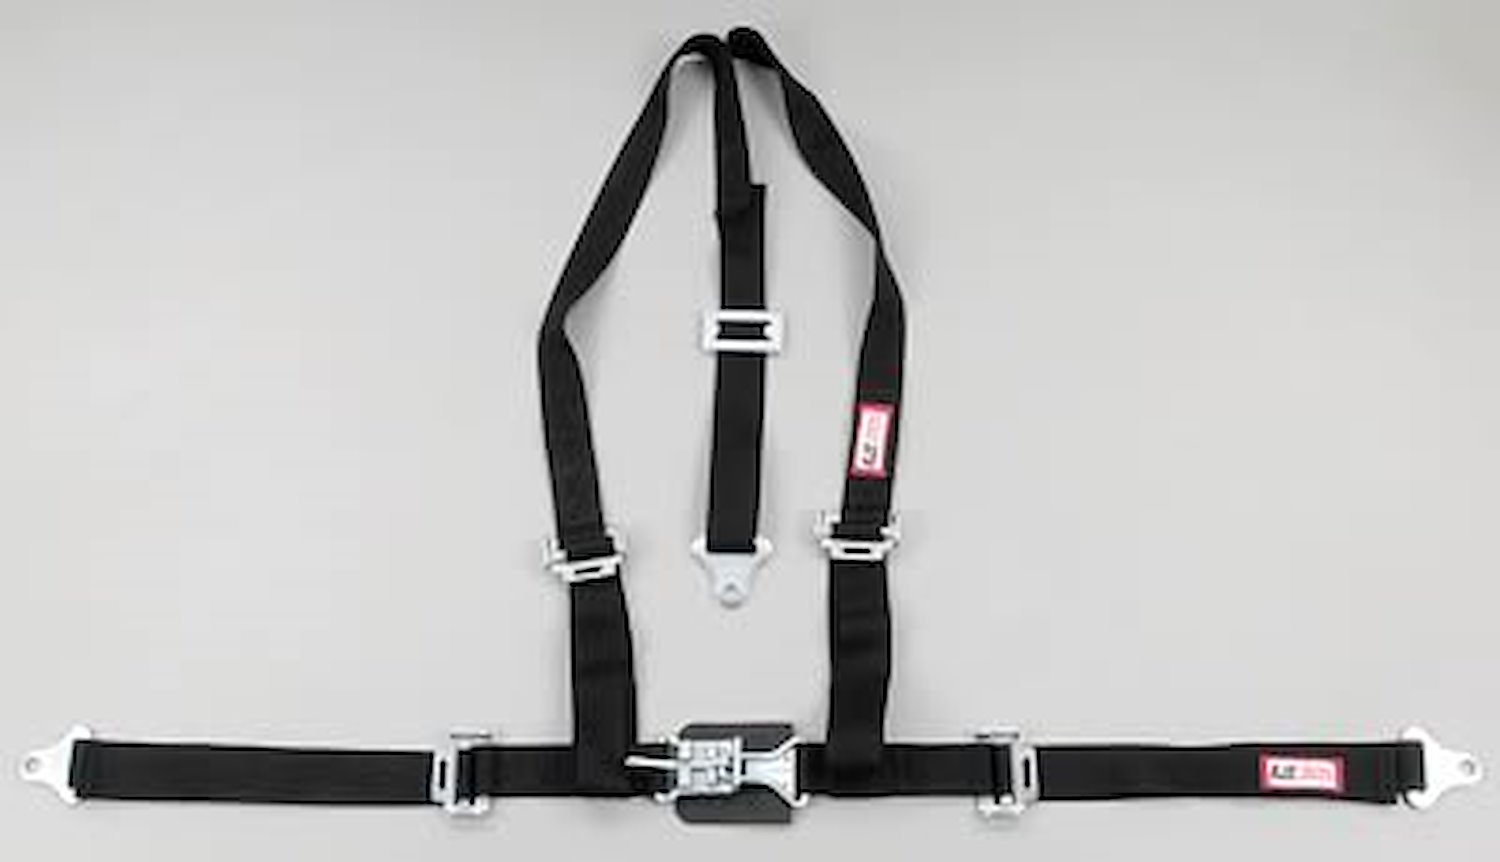 NON-SFI L&L HARNESS 3 PULL DOWN Lap Belt w/adjuster SNAP 2 S.H. Individual FLOOR Mount WRAP/SNAP RED